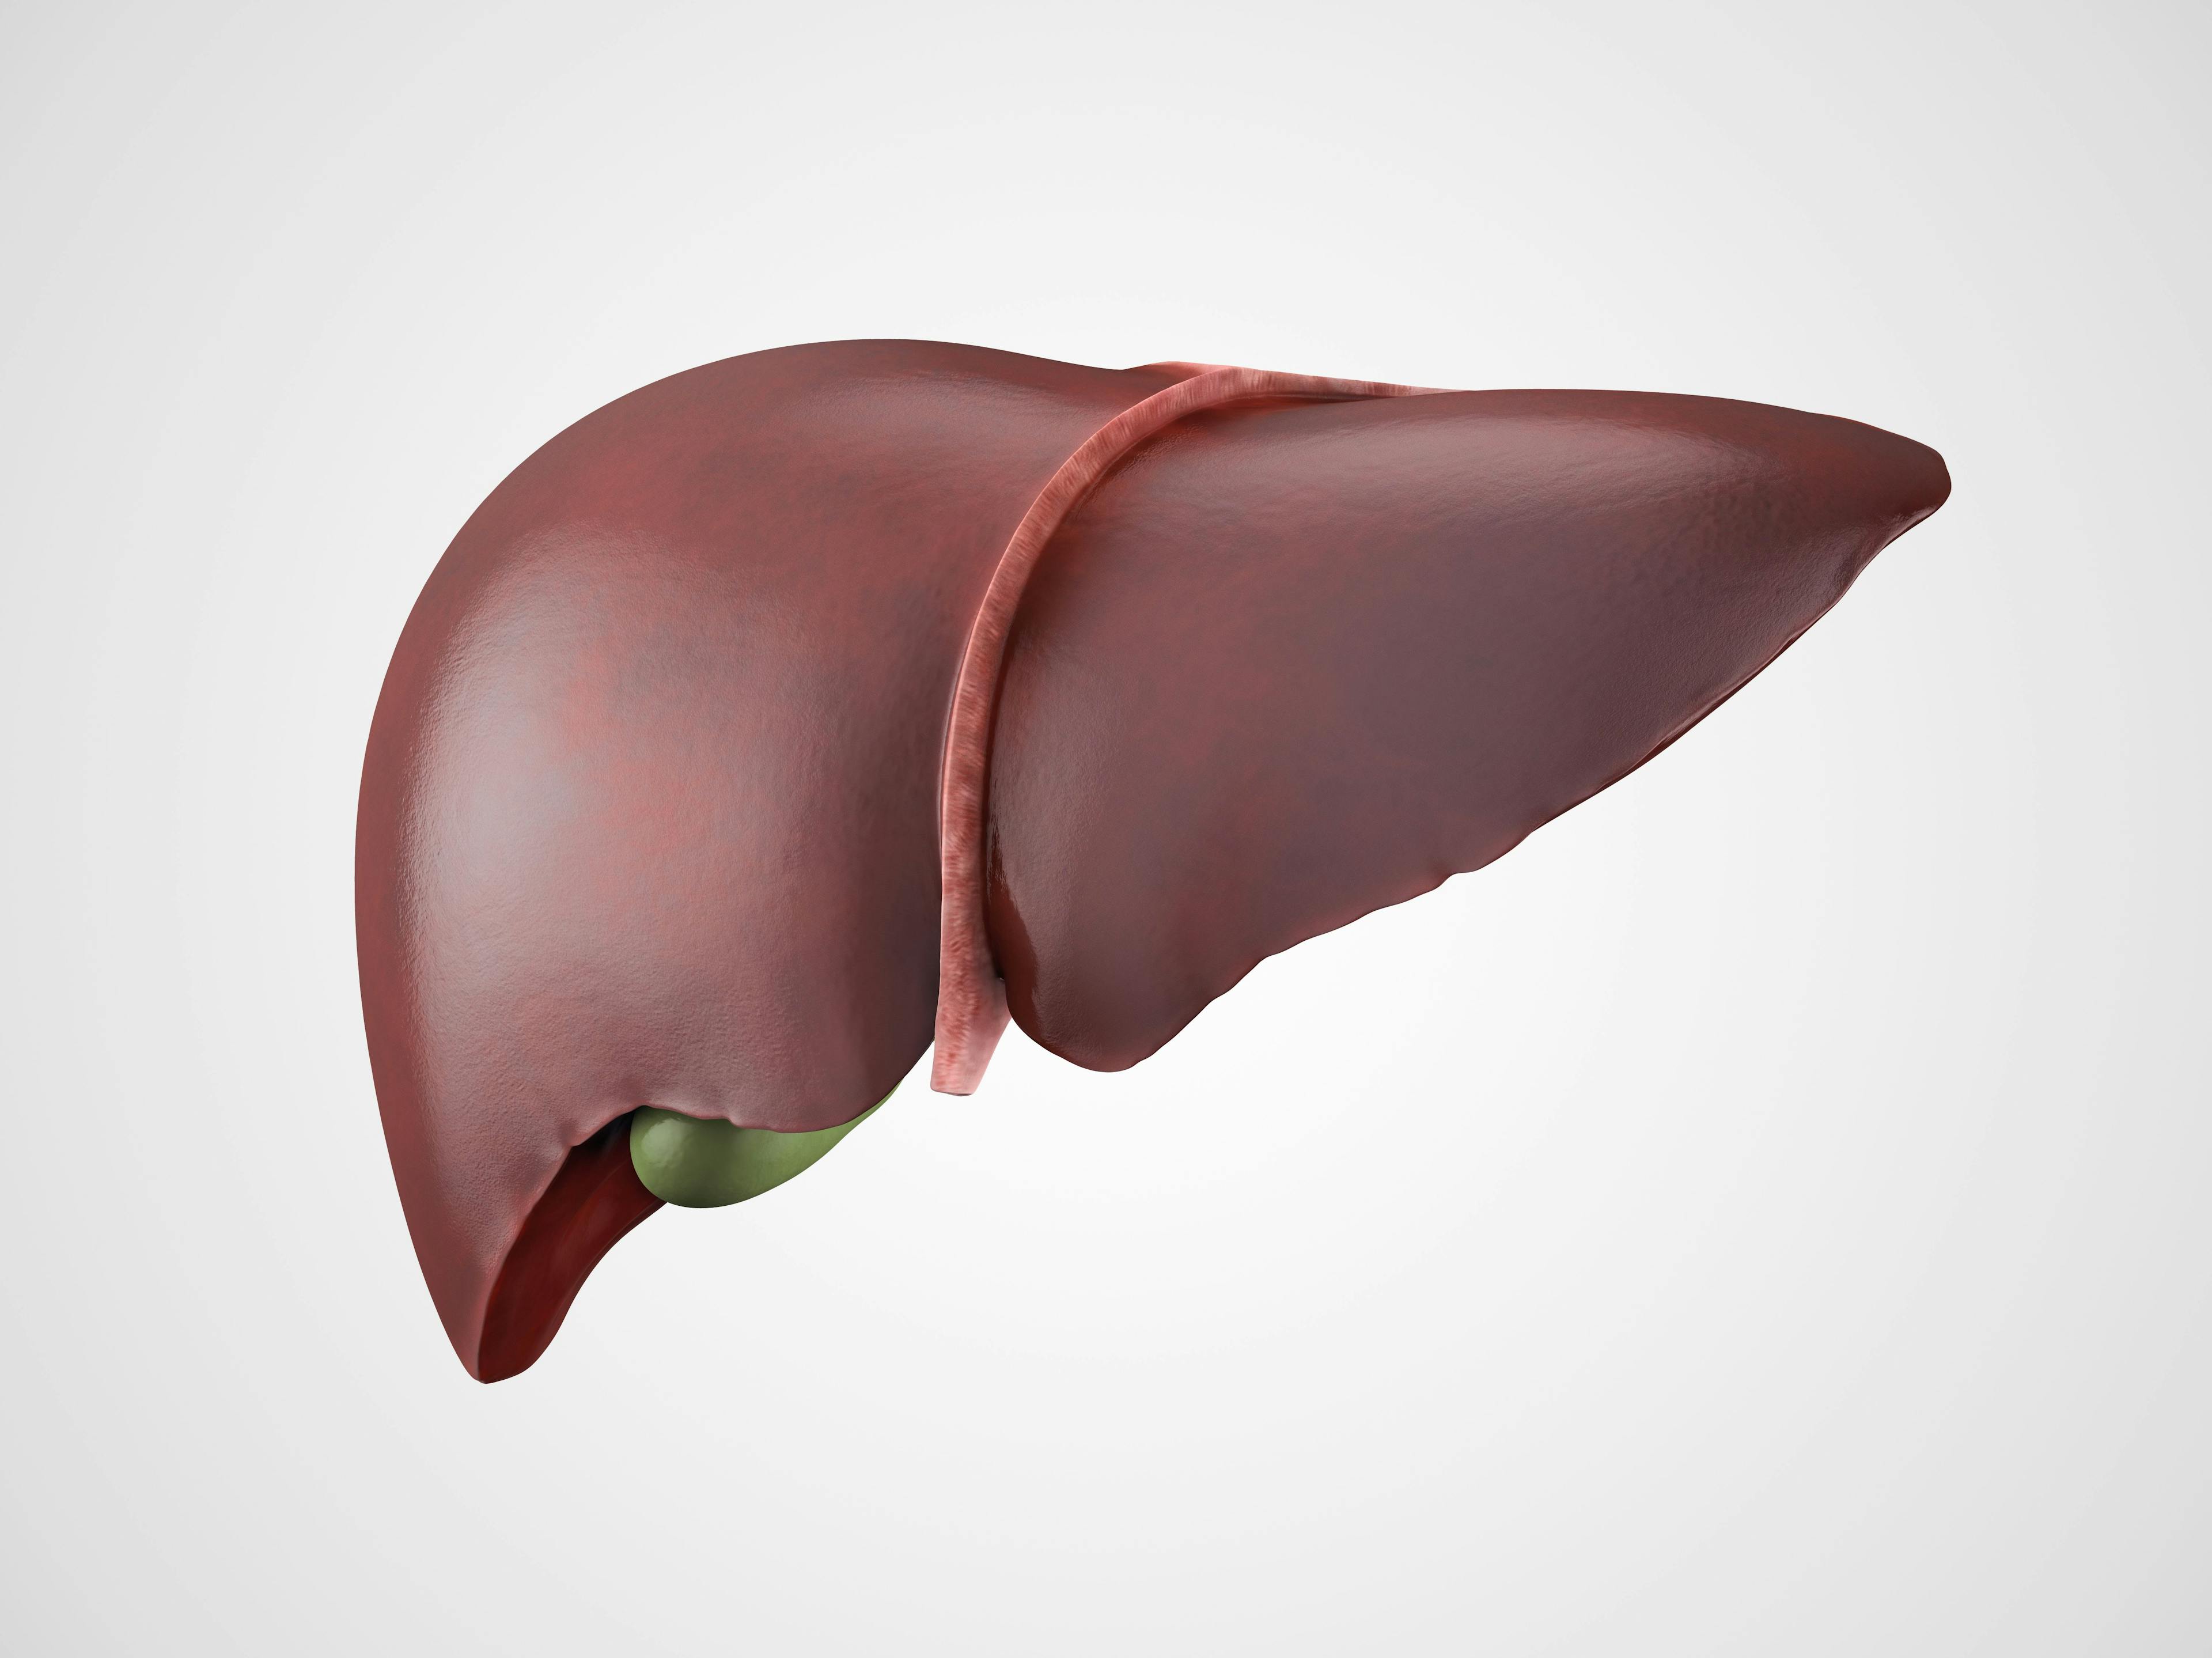 Although patients with unresectable hepatocellular carcinoma initially appeared to have survival benefit following treatment with pembrolizumab and lenvatinib vs lenvatinib alone, the findings did not meet statistical significance.